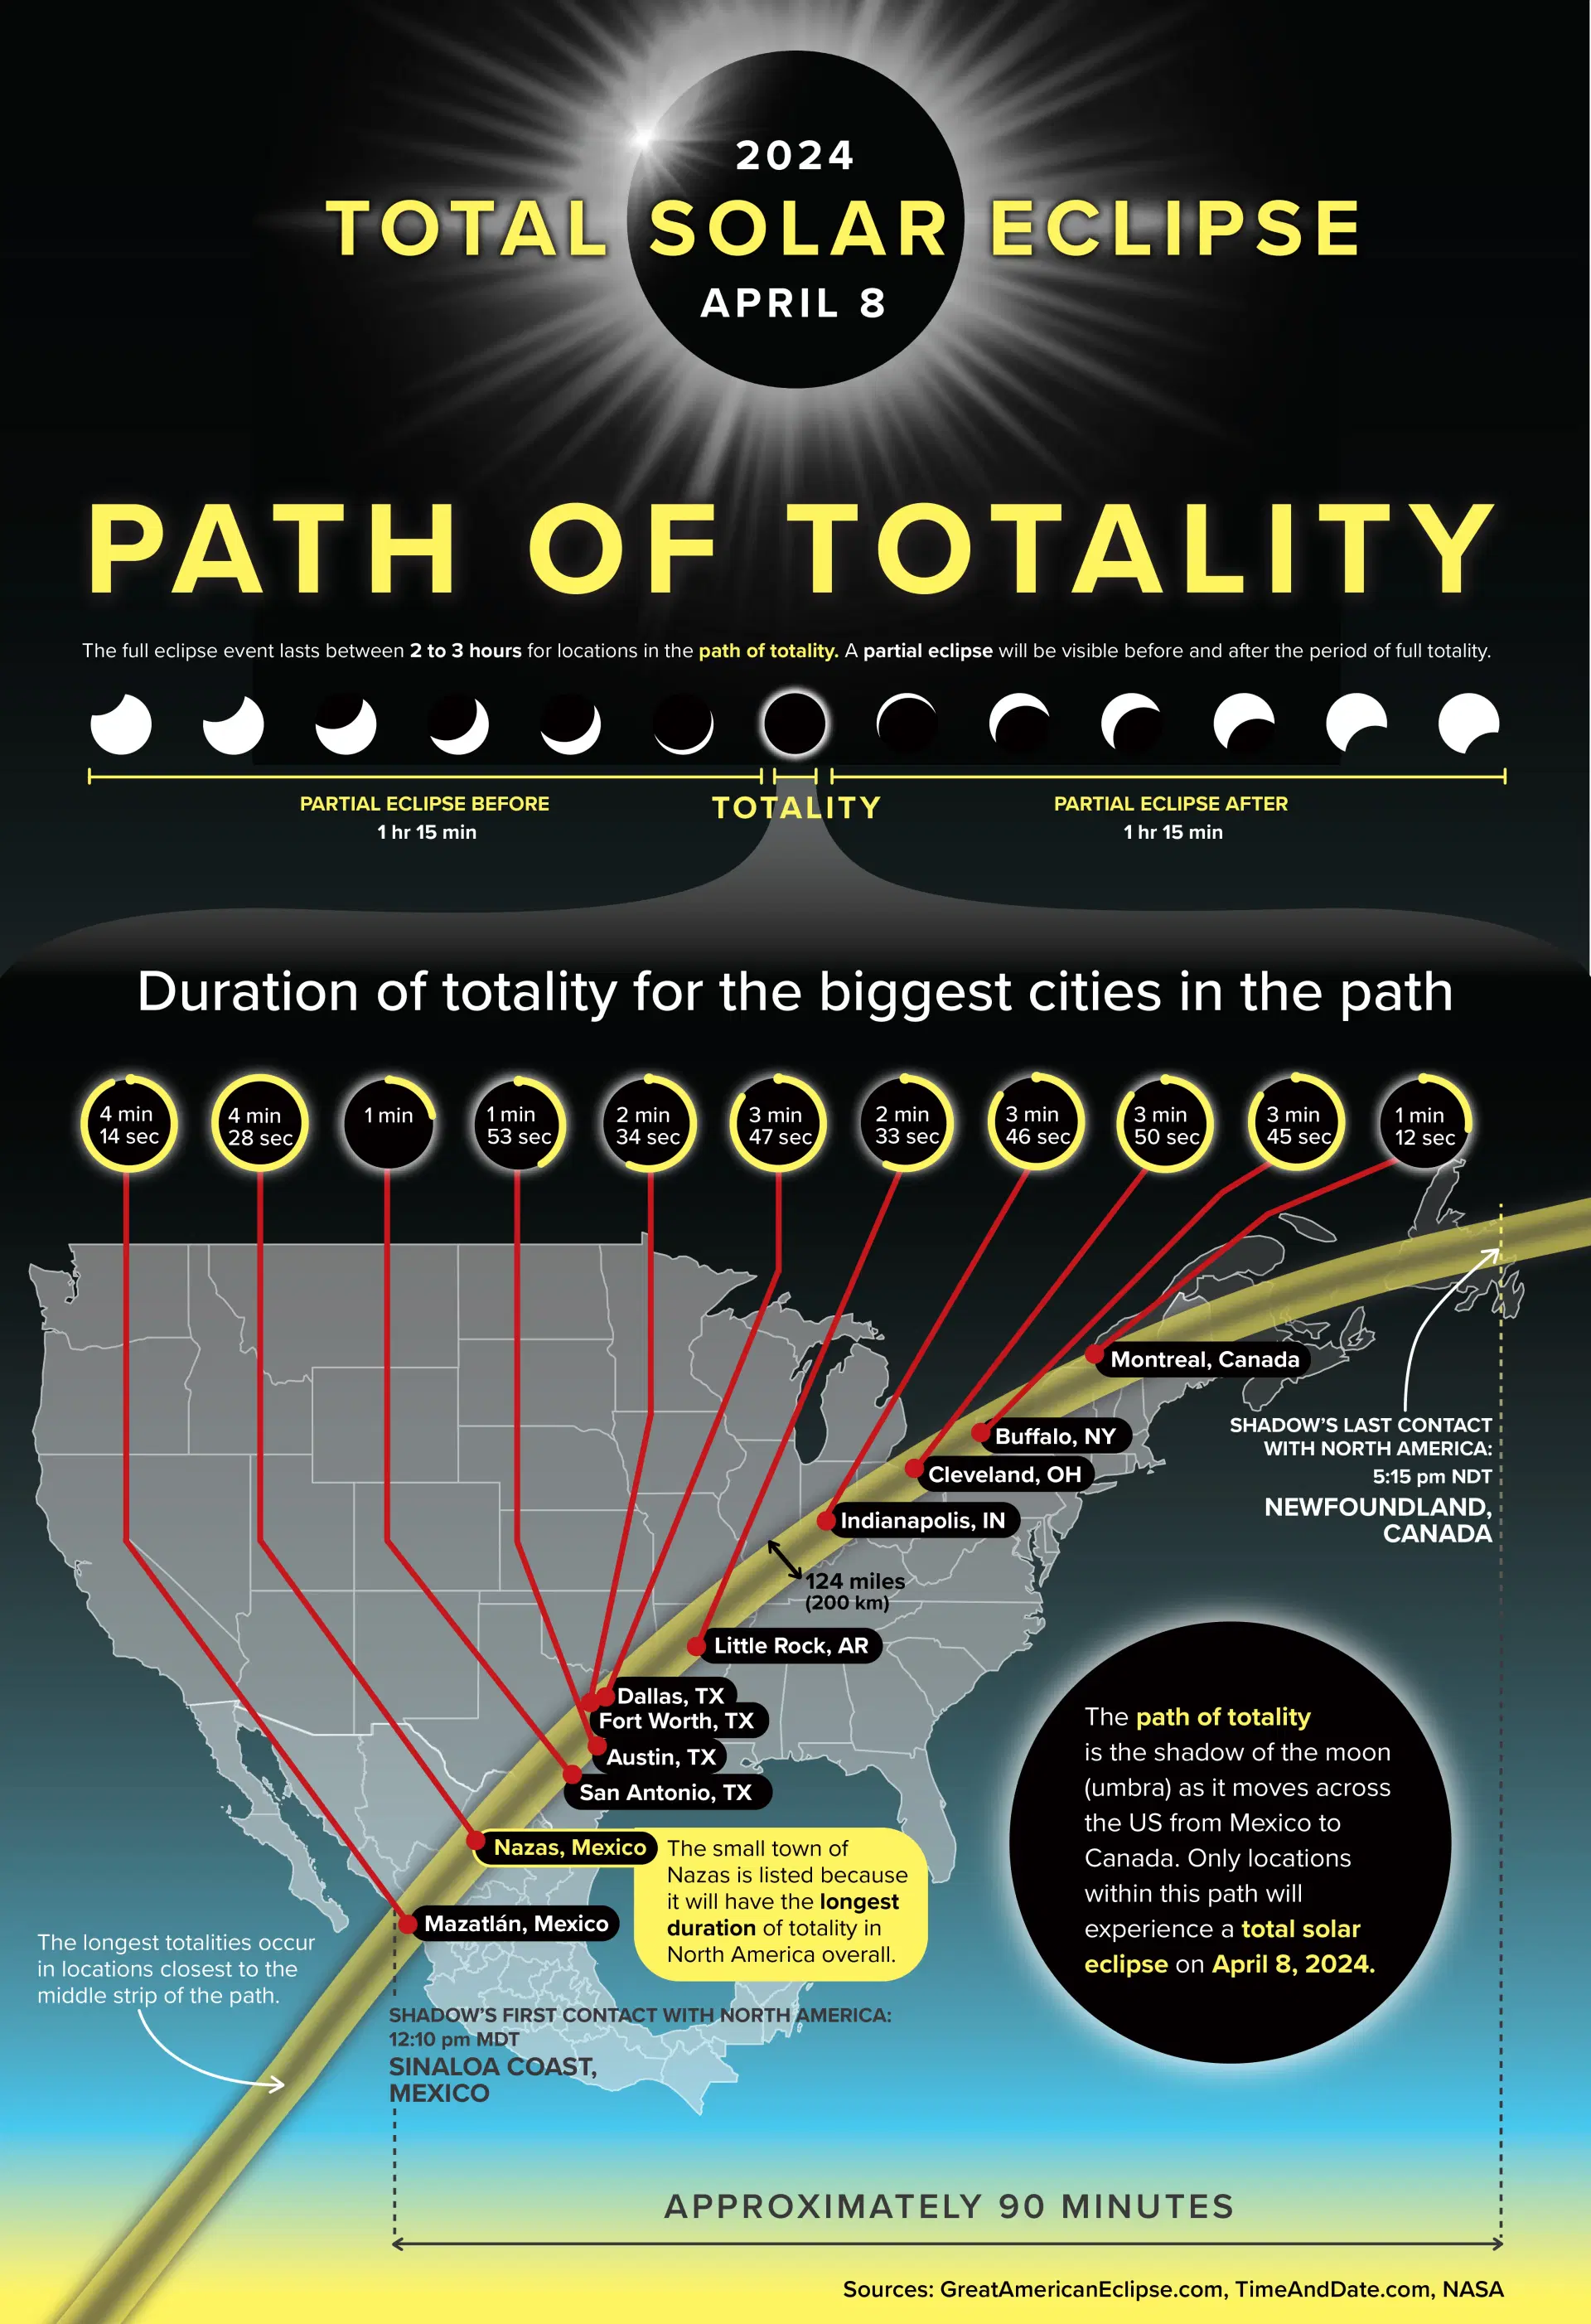 Solar Eclipse 2024: Total Eclipse Duration for Biggest Cities in the Path of Totality